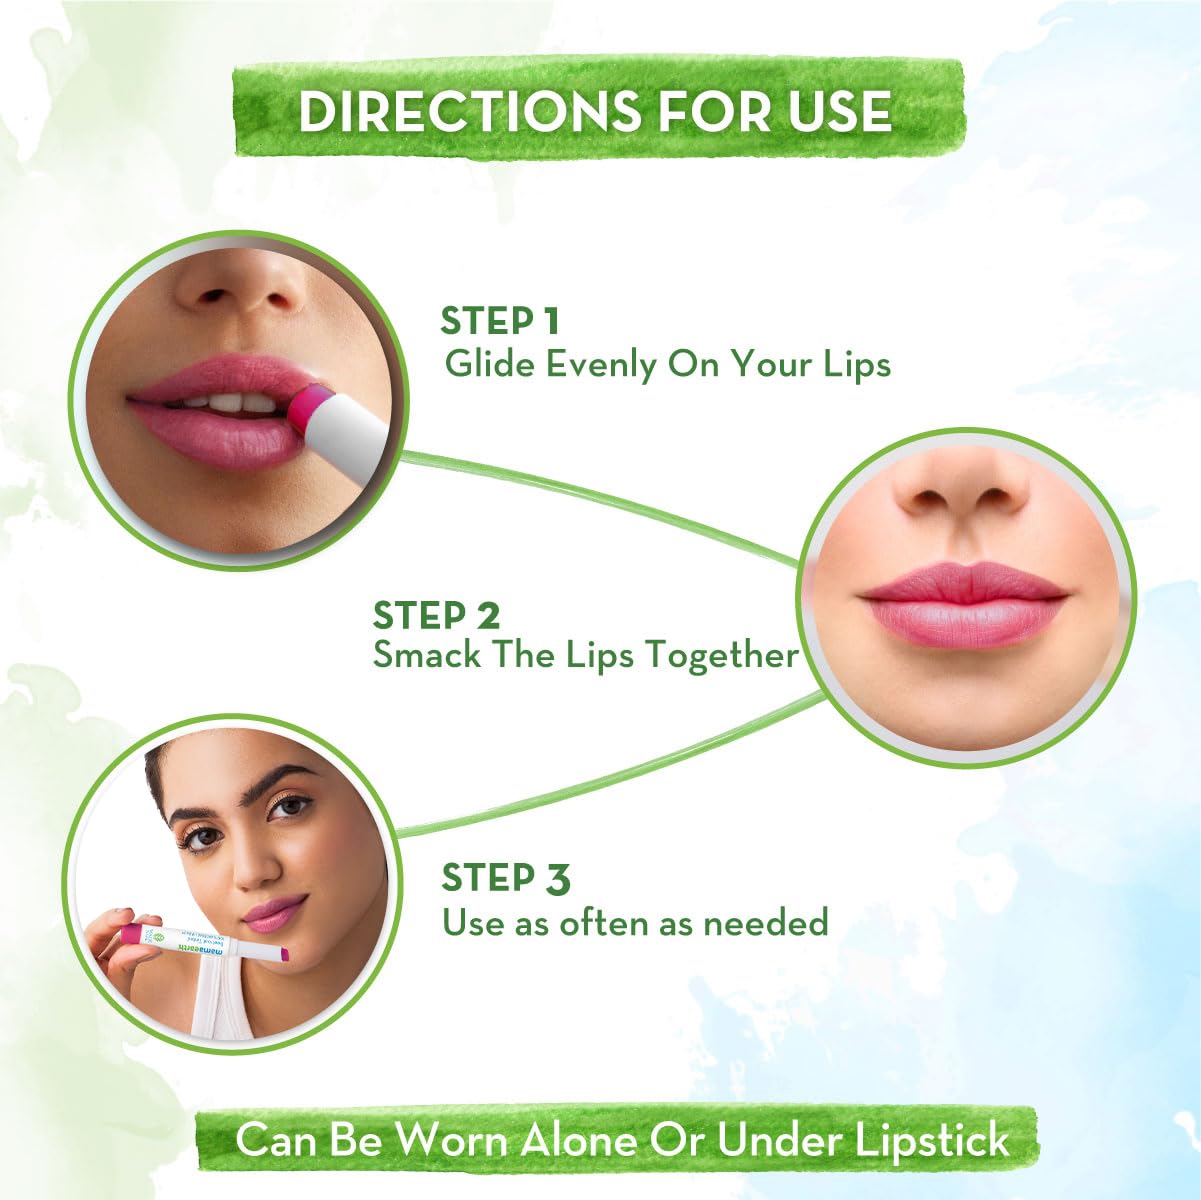 mamaearth beetroot tinted lip balm directions for use